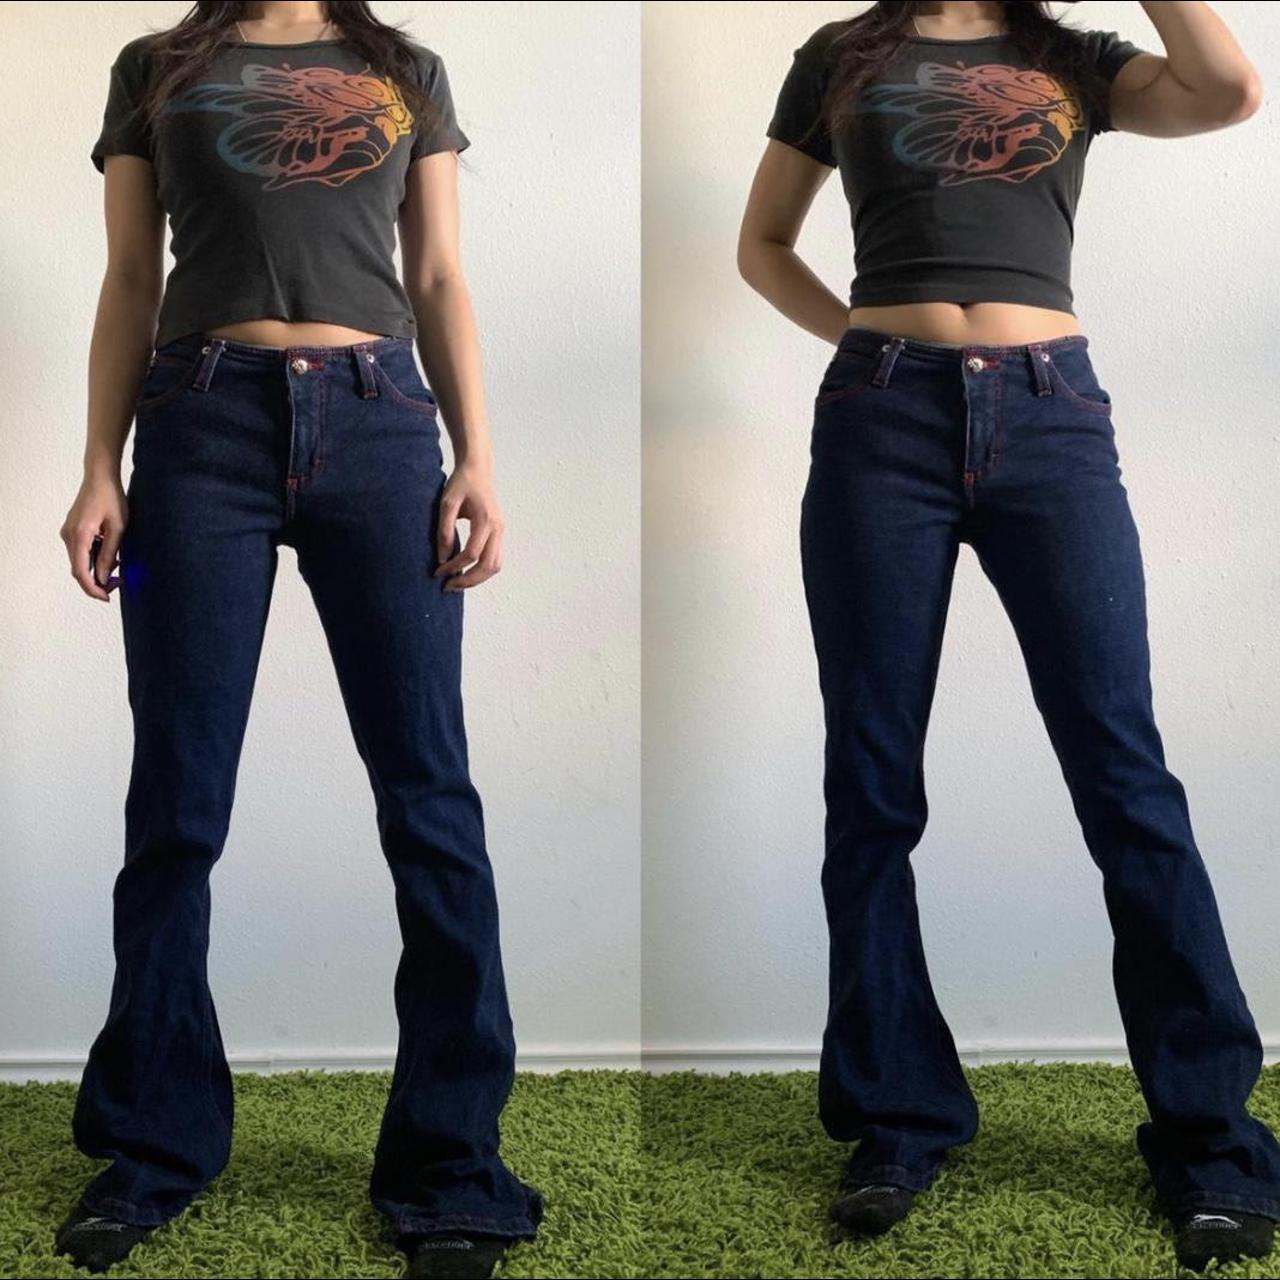 Mudd Clothing Women's Red and Navy Jeans | Depop